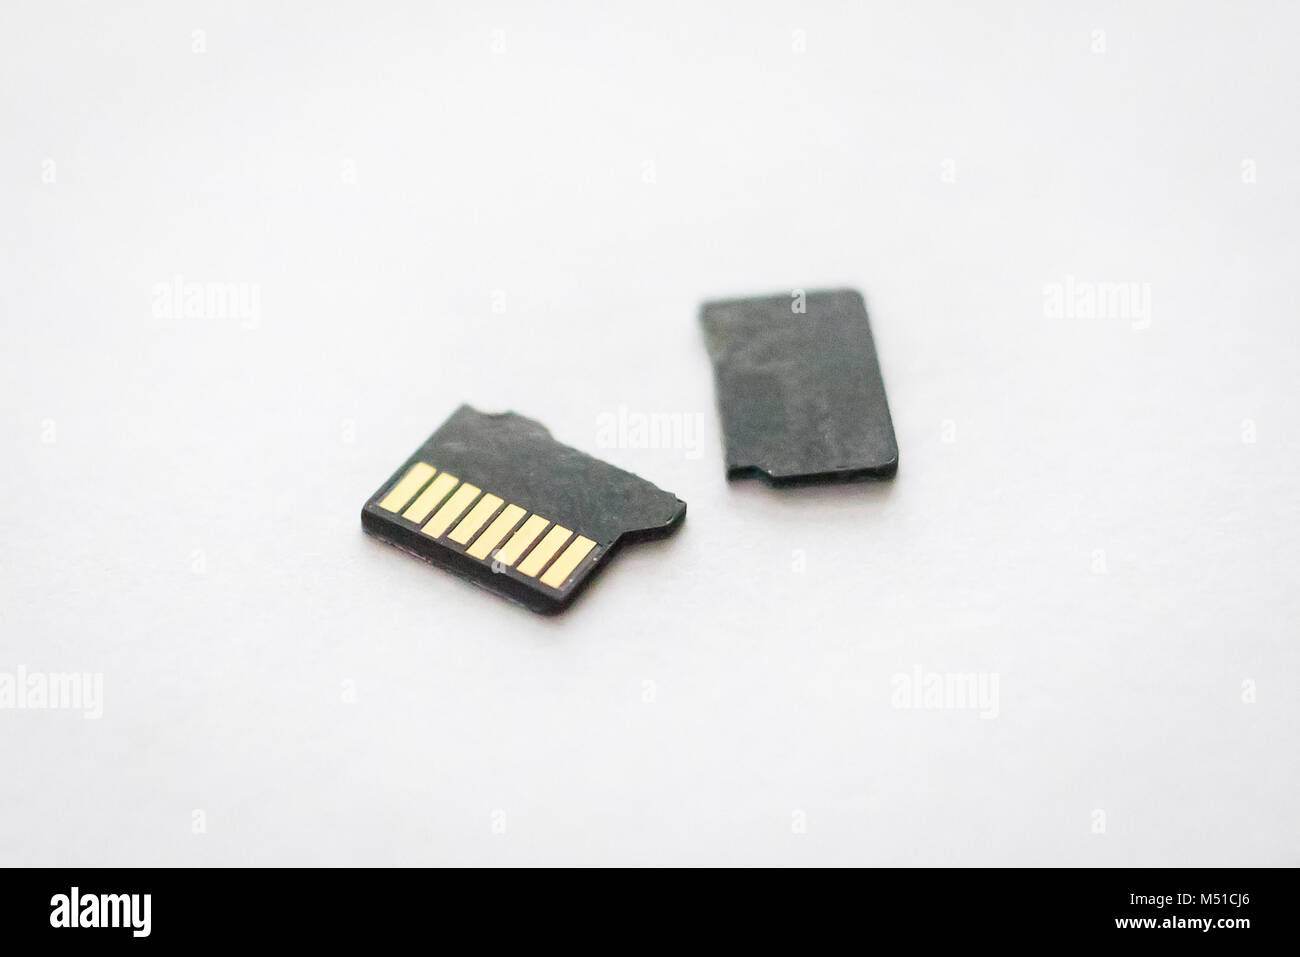 Broken destroyed micro sd card on white surface close Stock Photo - Alamy